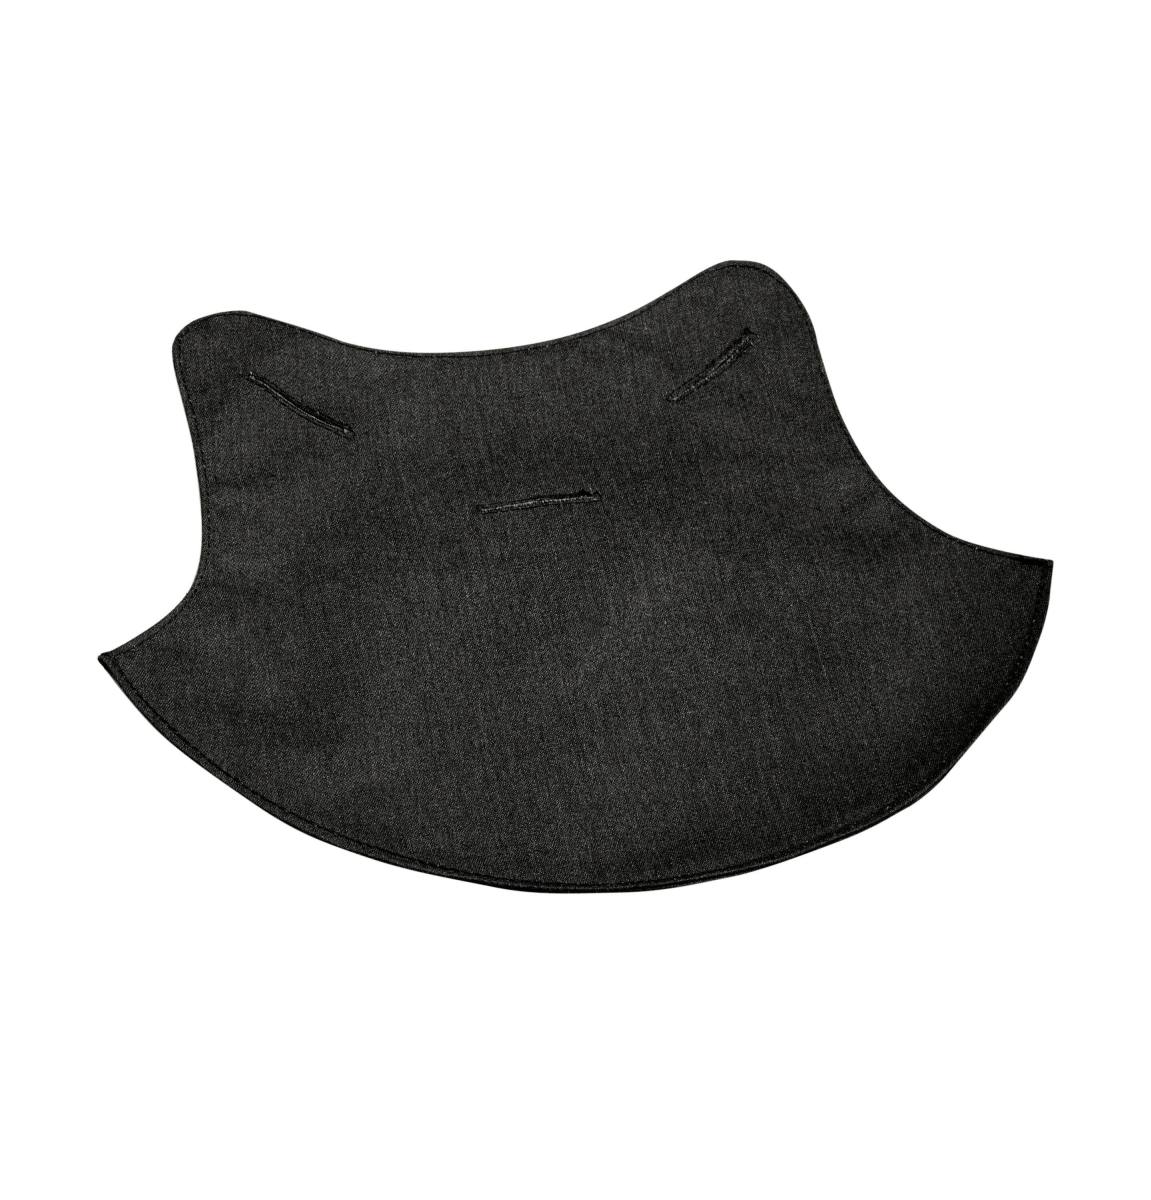 3M Splash and heat protection neck cover for high temperatures, cotton/para-aramid, NC1-GR for G3501